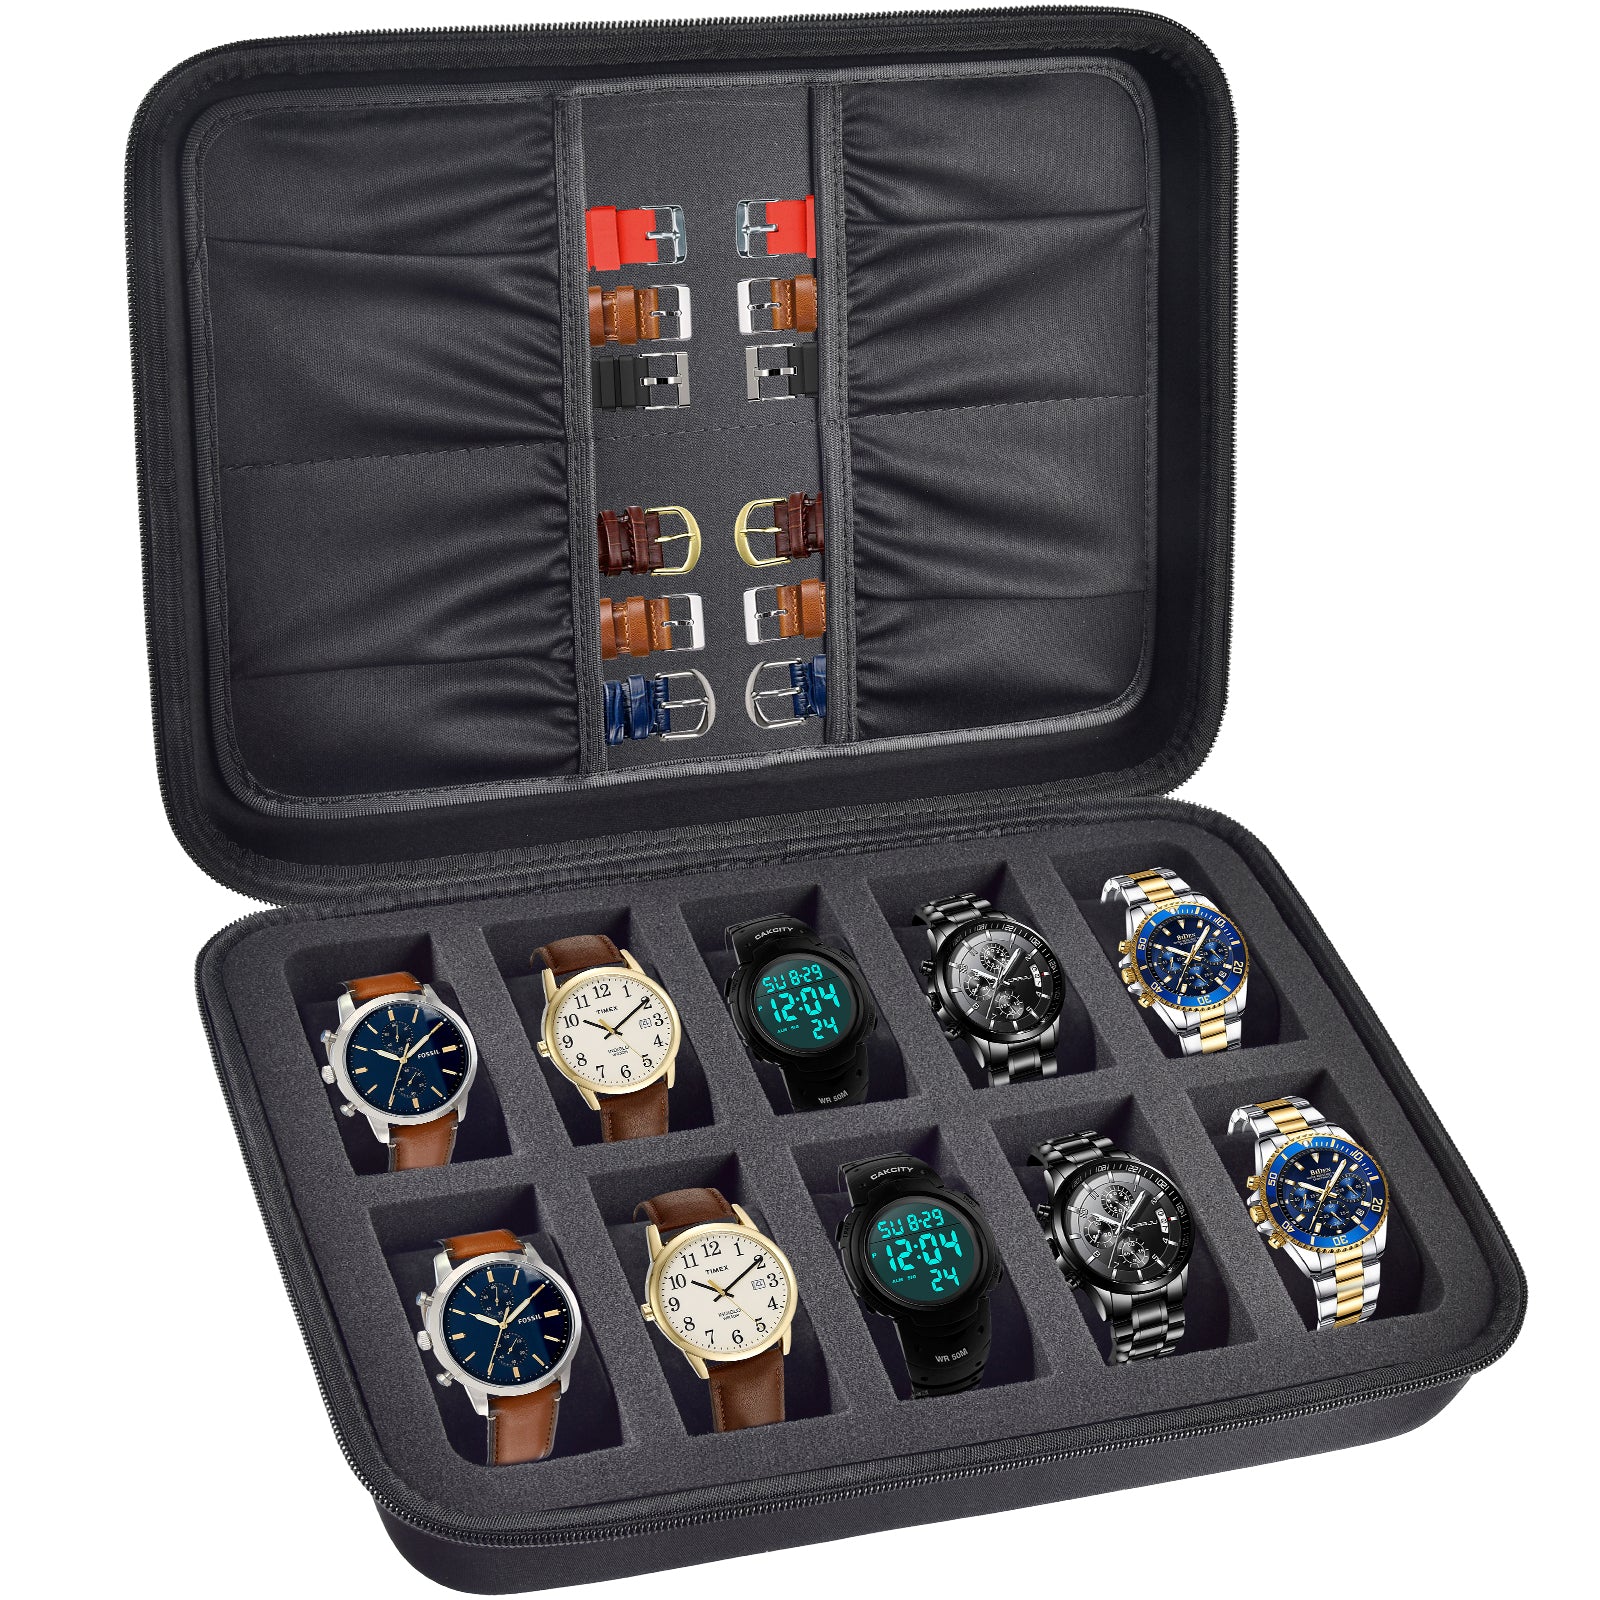 Watch Collection Organizer …  Displaying collections, Jewelry rack, Watch  display case